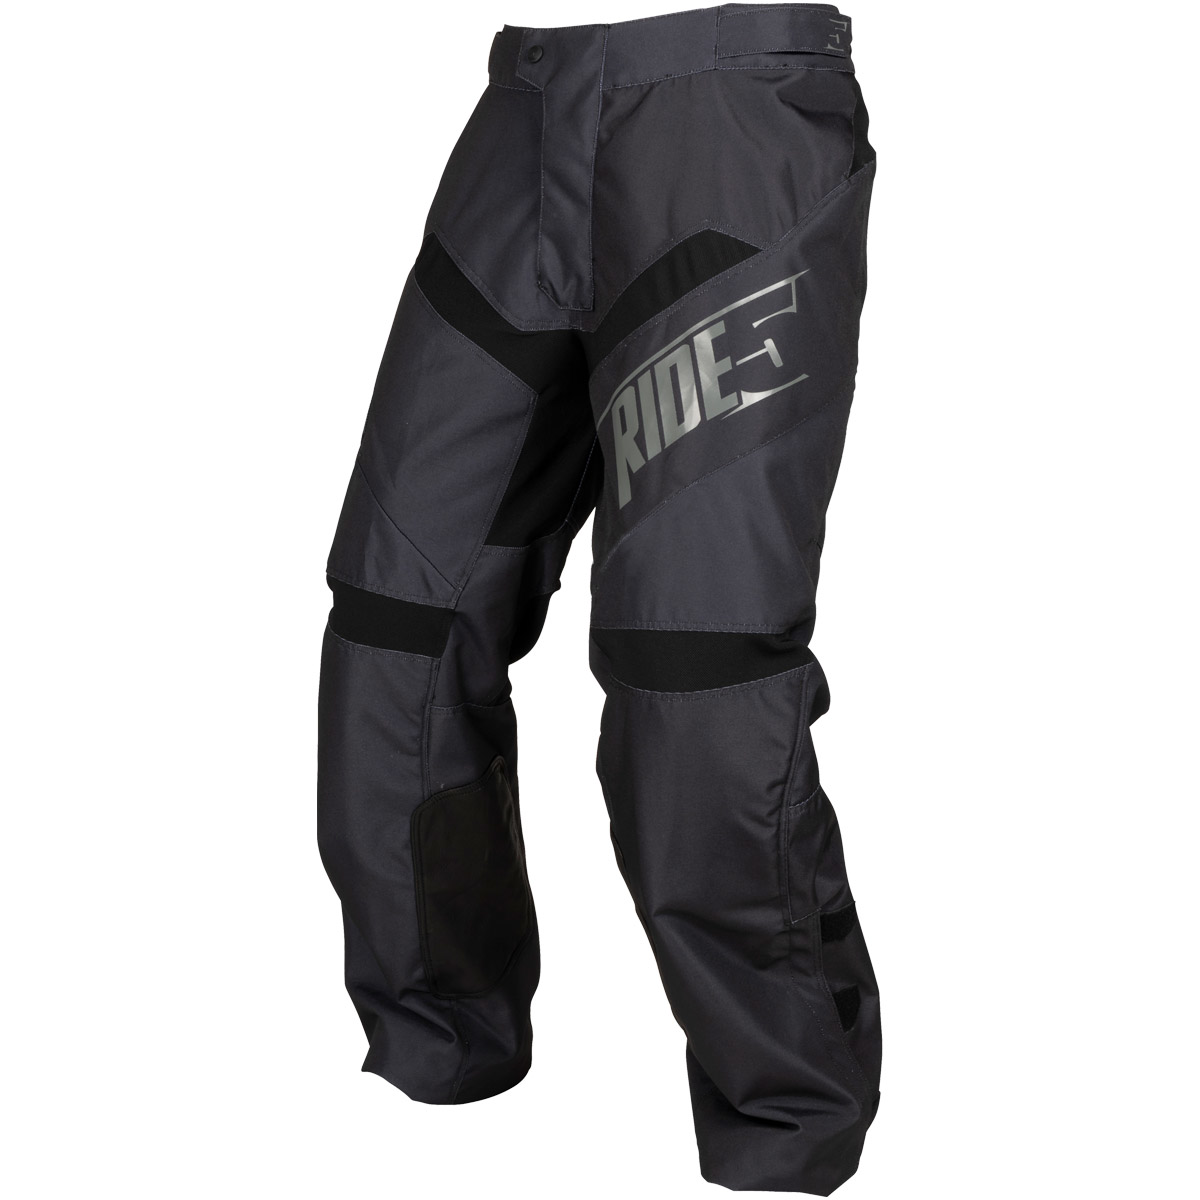 509 insulated pants for men rseries otb